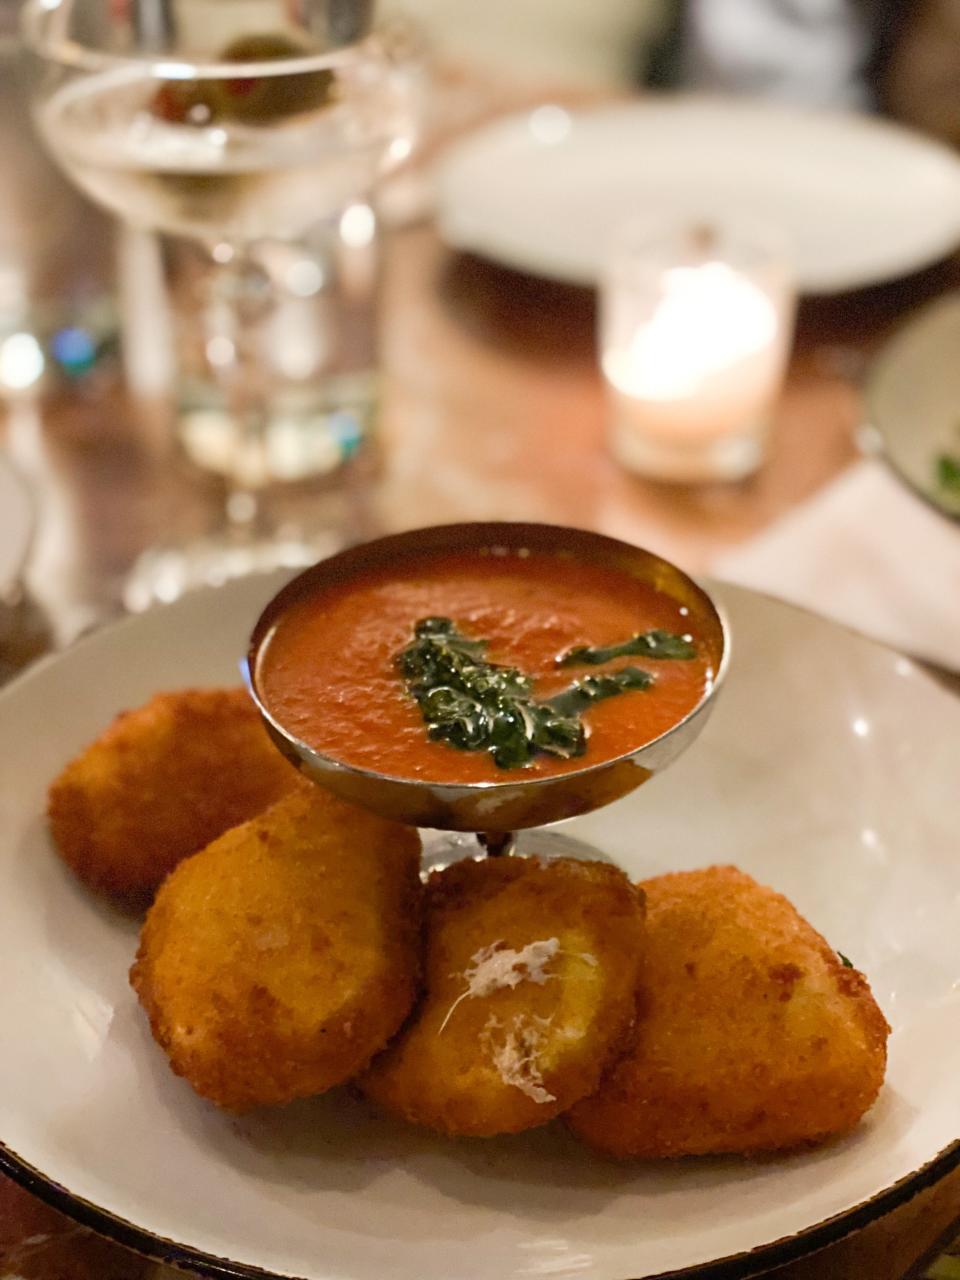 Fried Mozz antipasti on Andrew Michael Italian Kitchen's new Family Night menu.  The crispy fried mozzarella is served with a homemade tomato sauce for dipping.